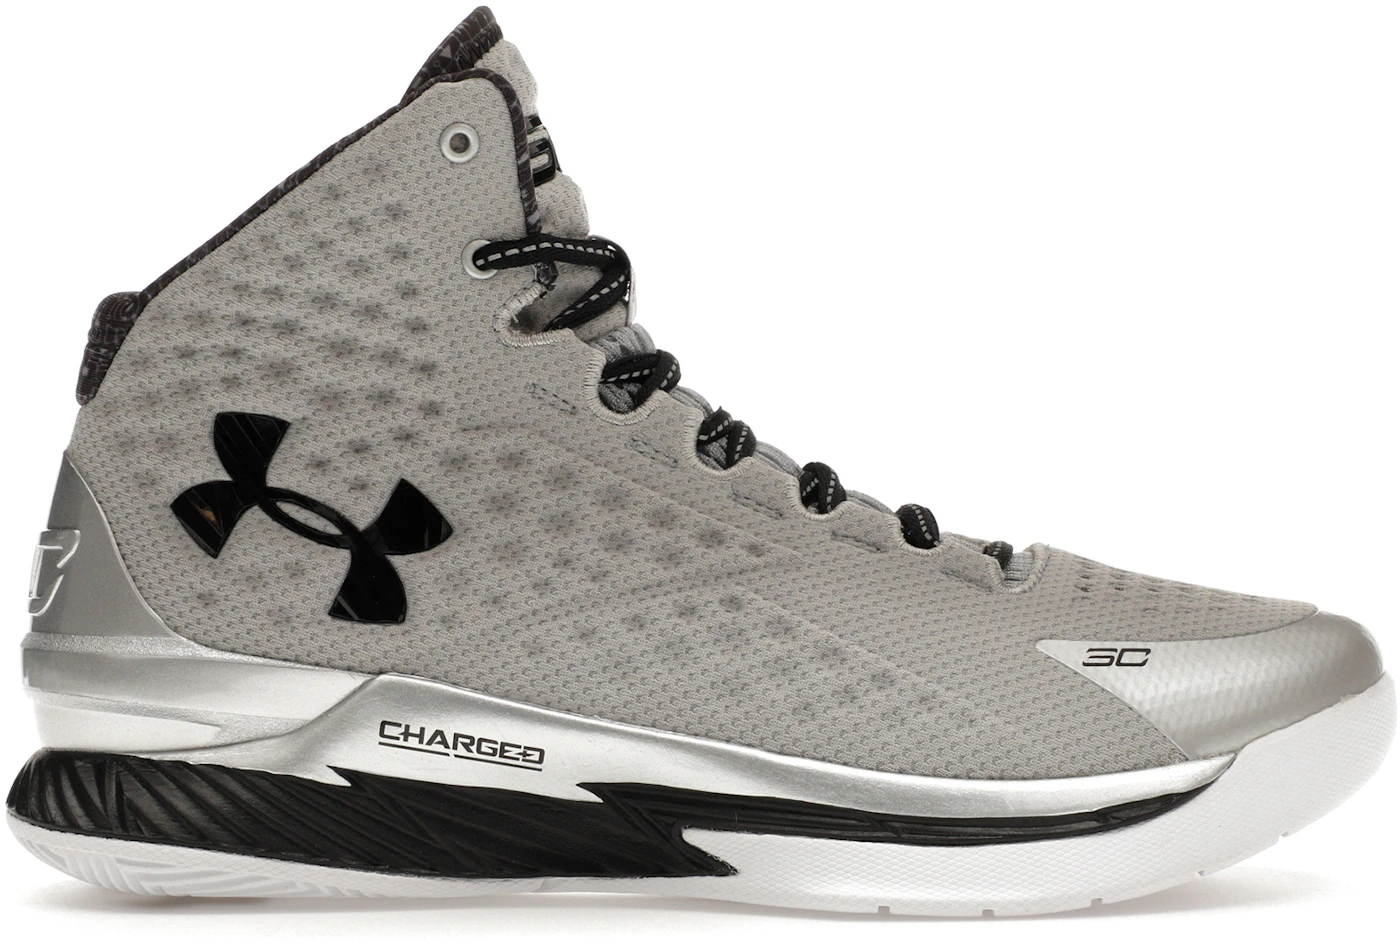 Under Armour Curry 1 Sneakers for Men for Sale, Shop Men's Sneakers